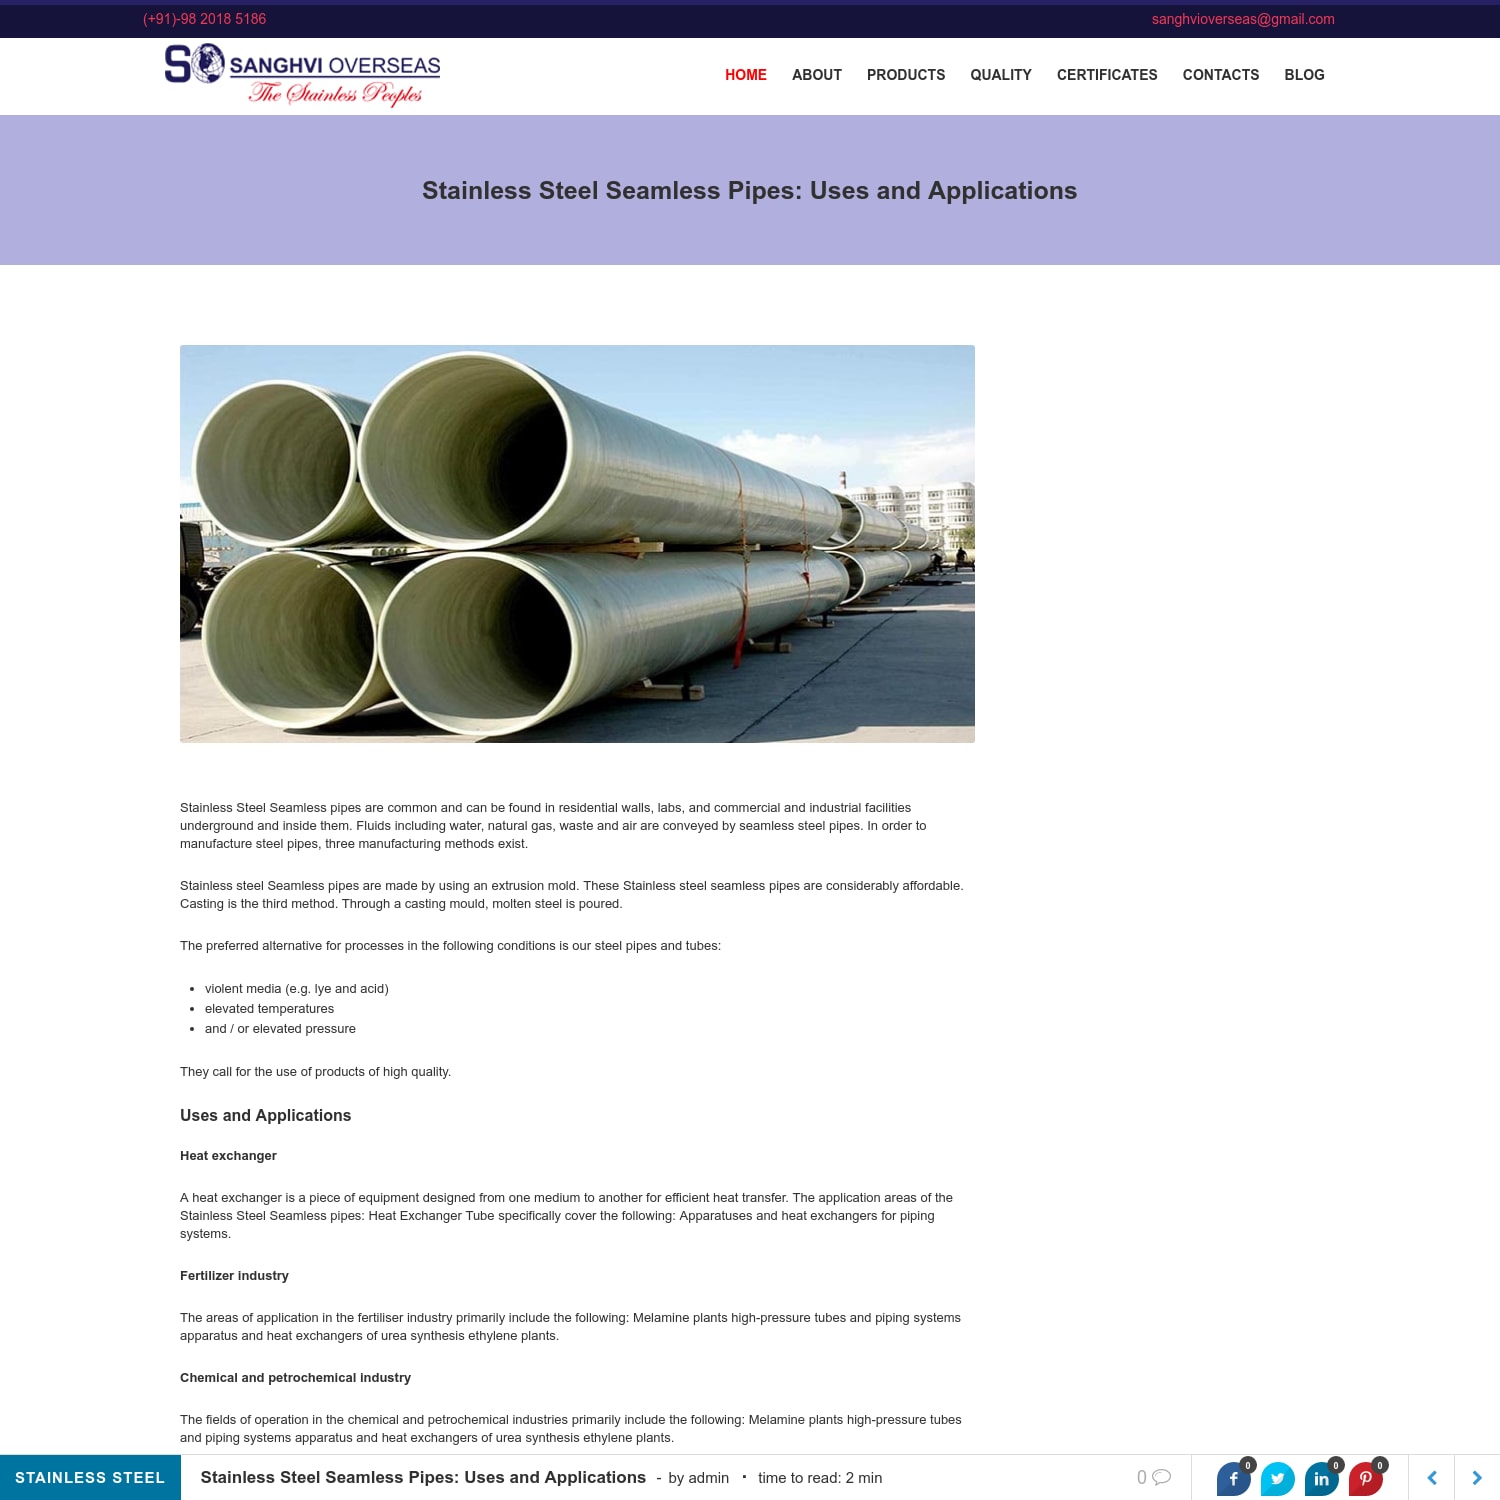 Stainless Steel Seamless Pipes: Uses and Applications - Sanghvi Overseas Blog